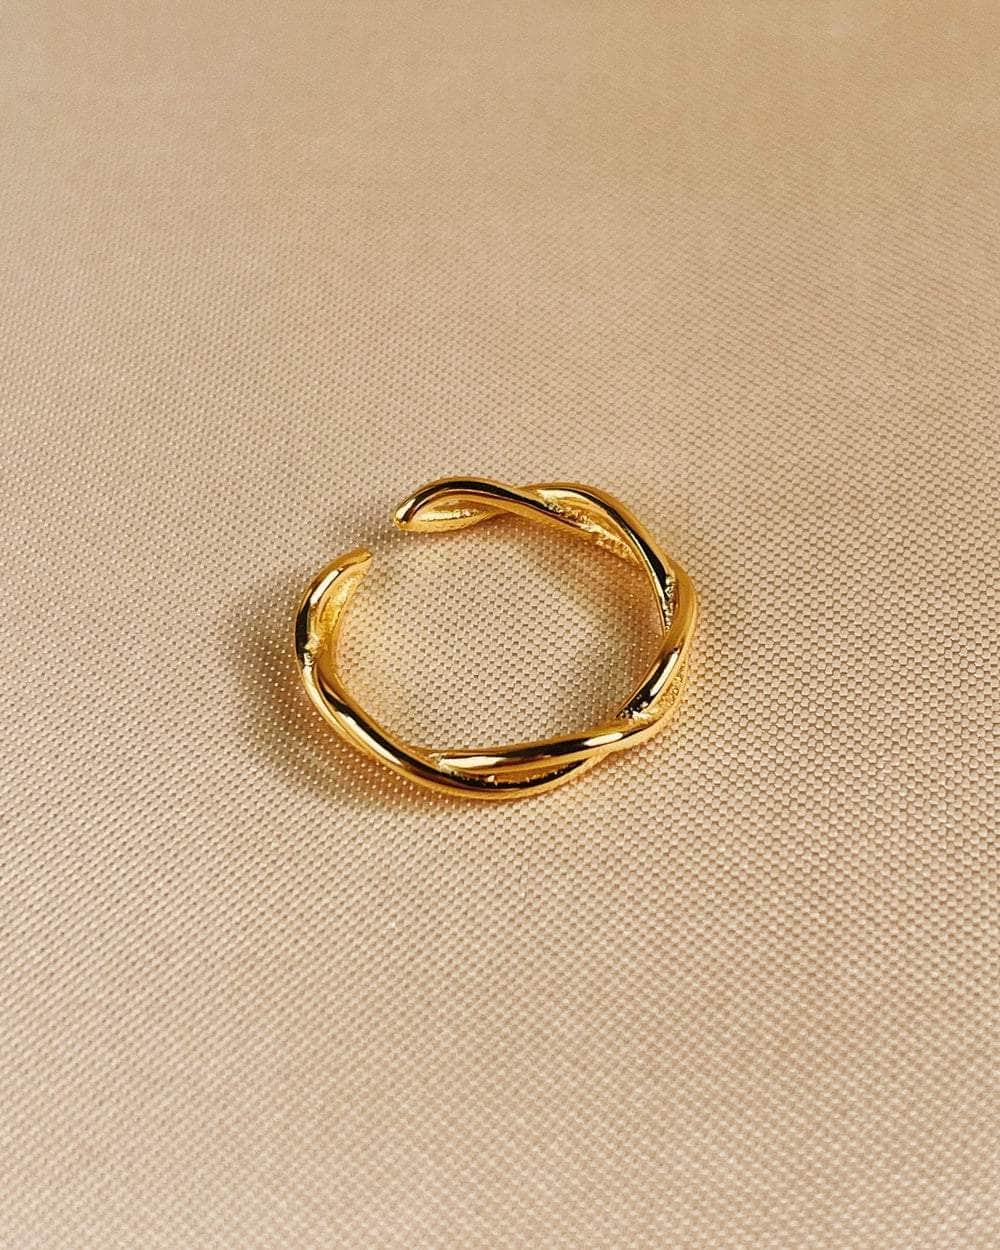 So Dainty Co. Rings Harper Gold Ring Gold Plated 925 Sterling Silver Jewelry